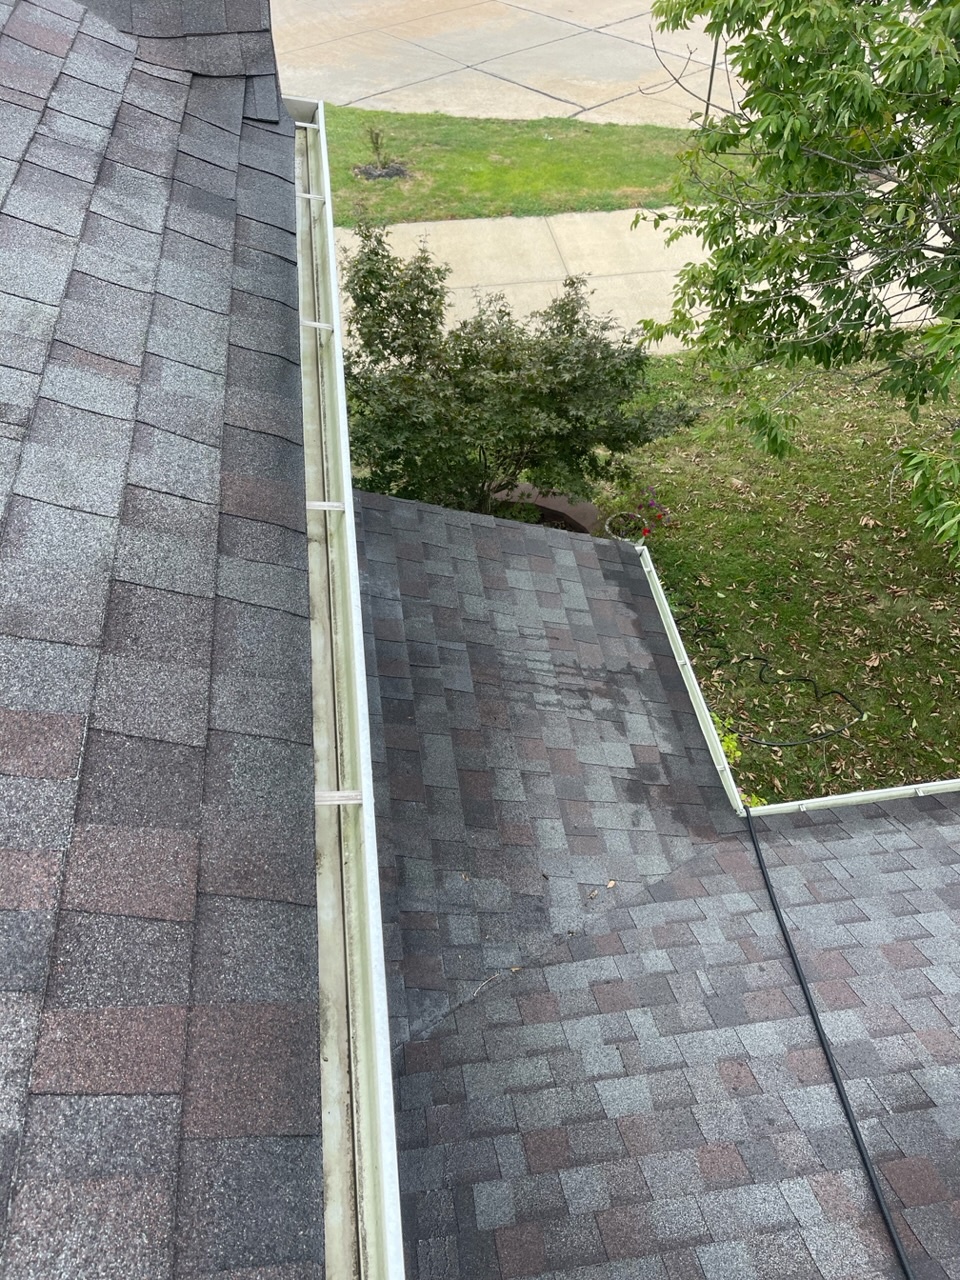 Professional Gutter Cleaners in Knoxville TN